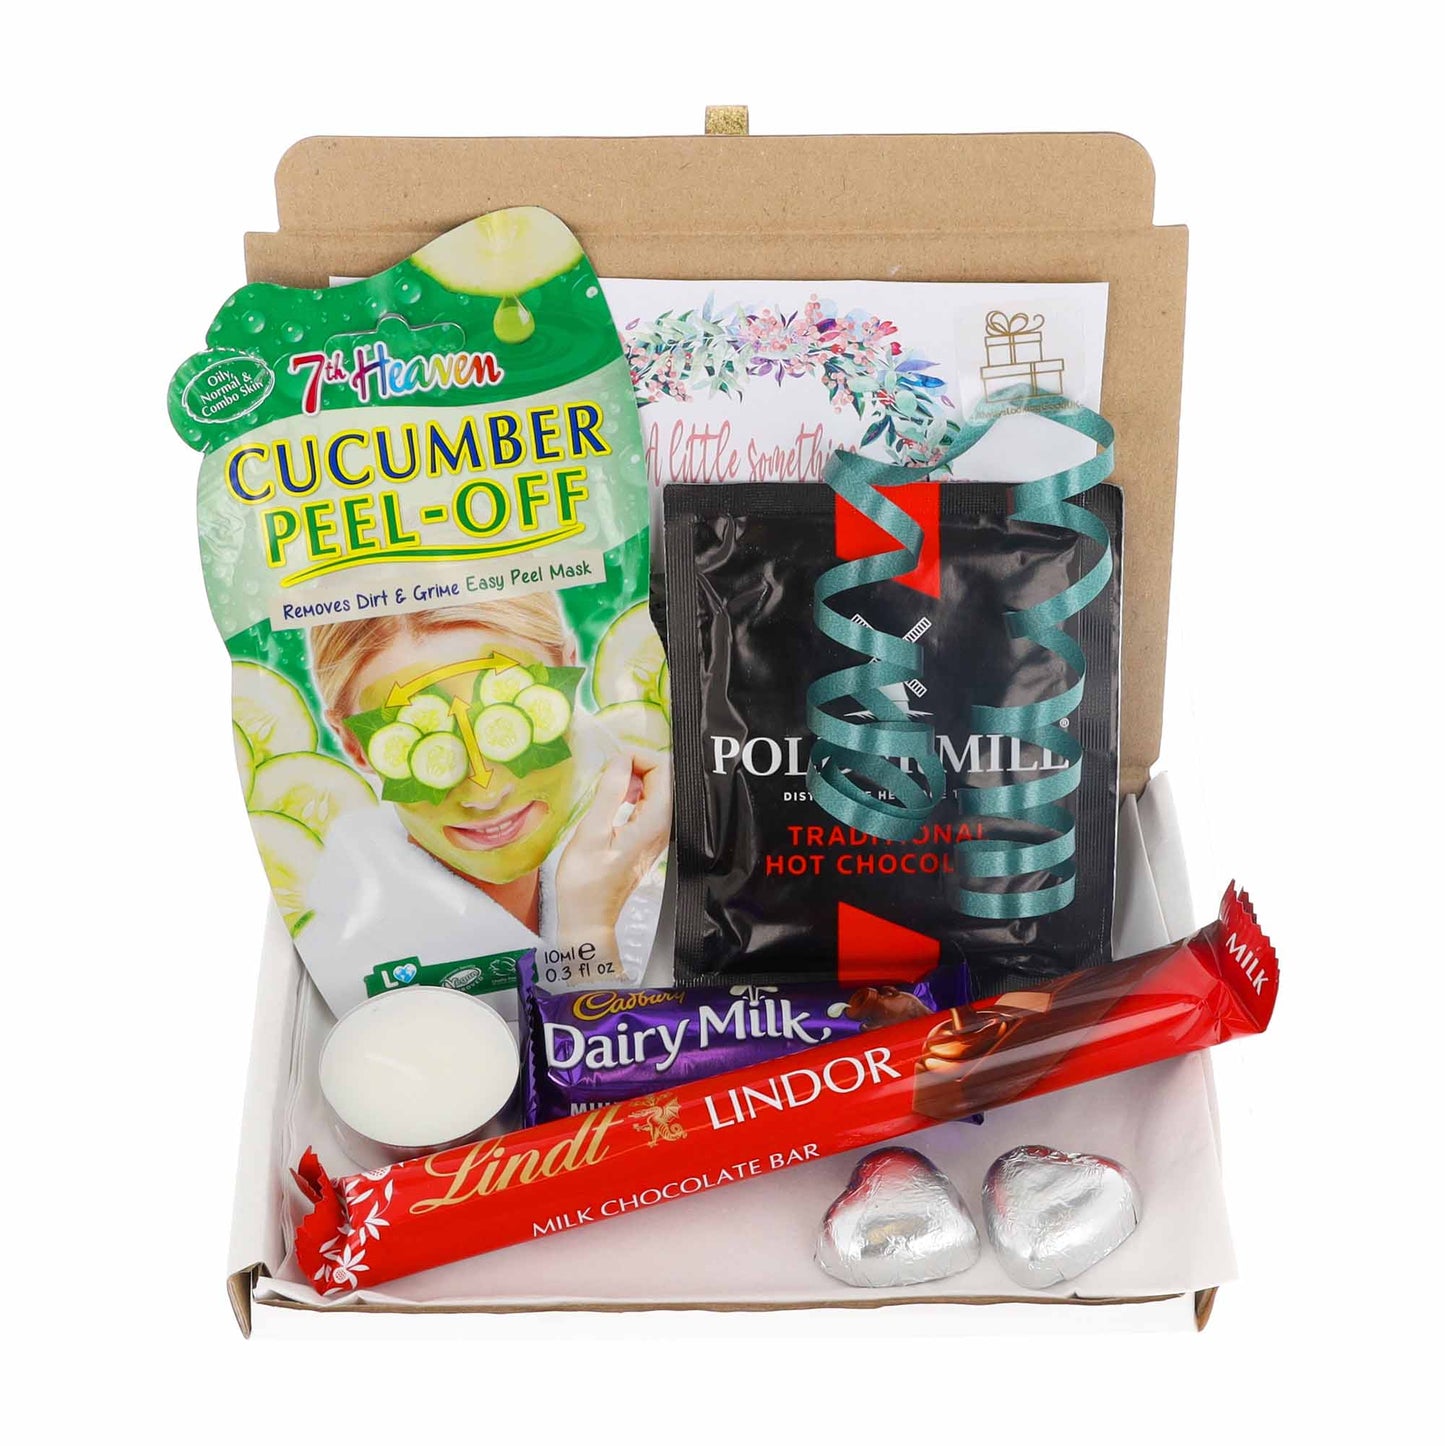 Chocolate Lover & Beauty Pamper Letterbox Gift Set  - Always Looking Good -   